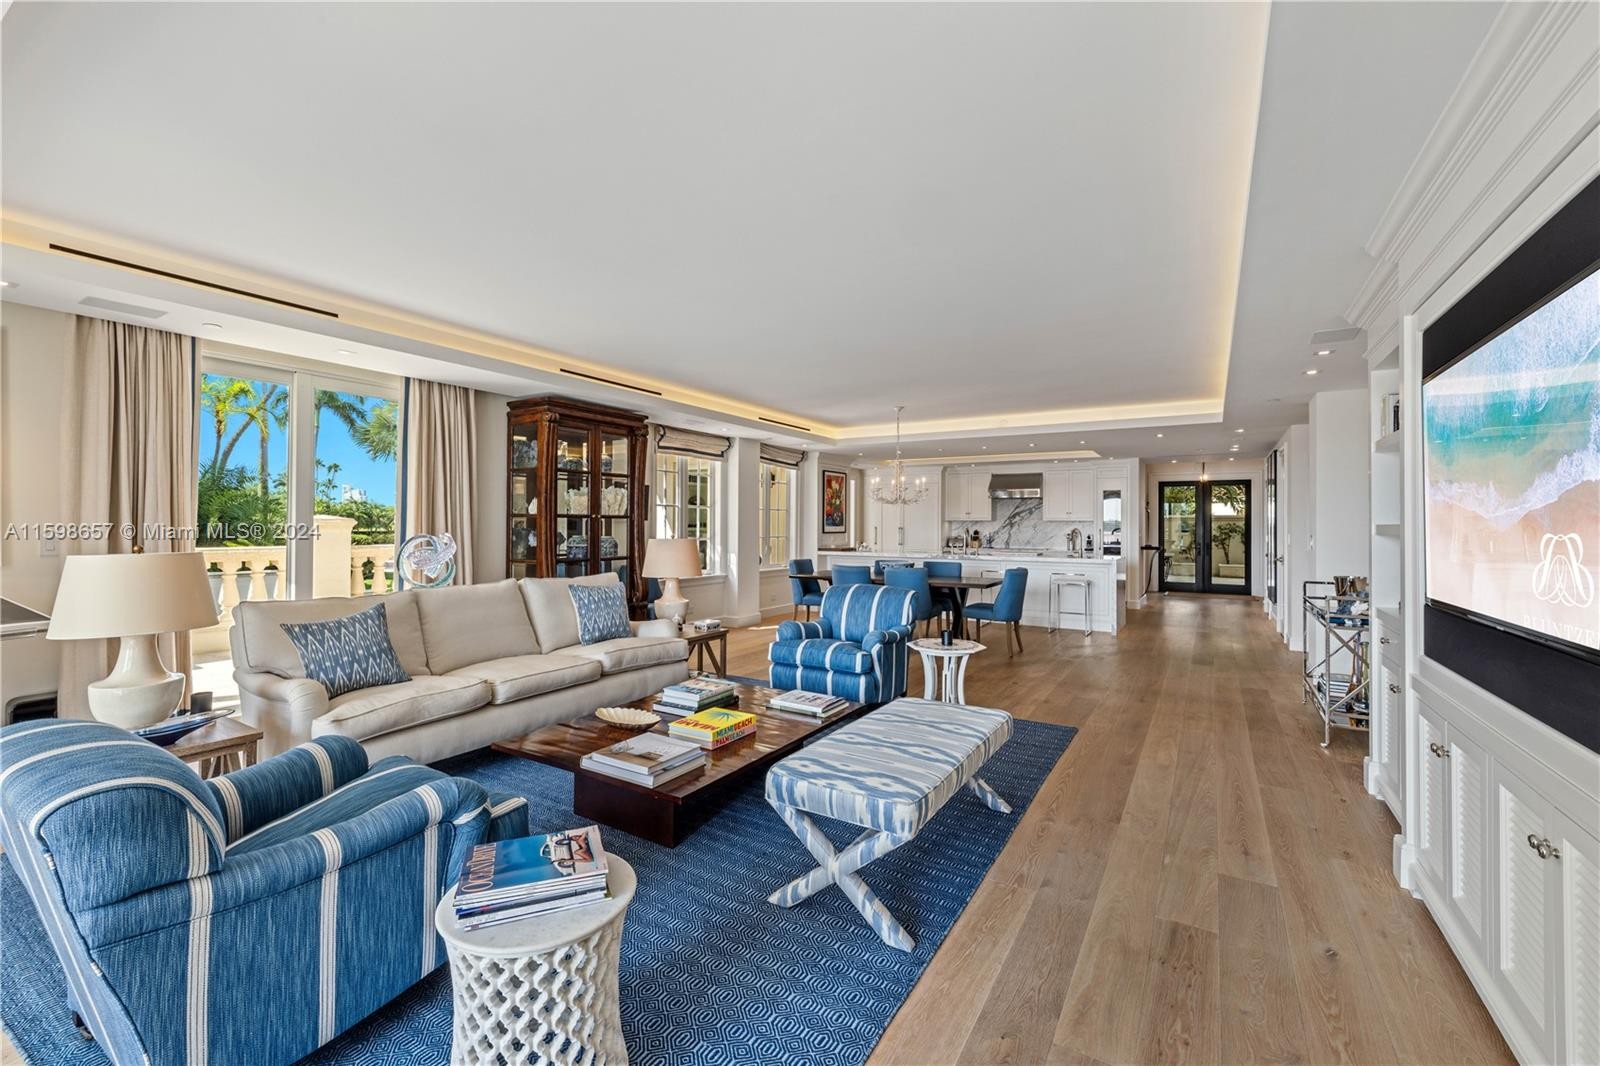 5. 2216 Fisher Island Dr